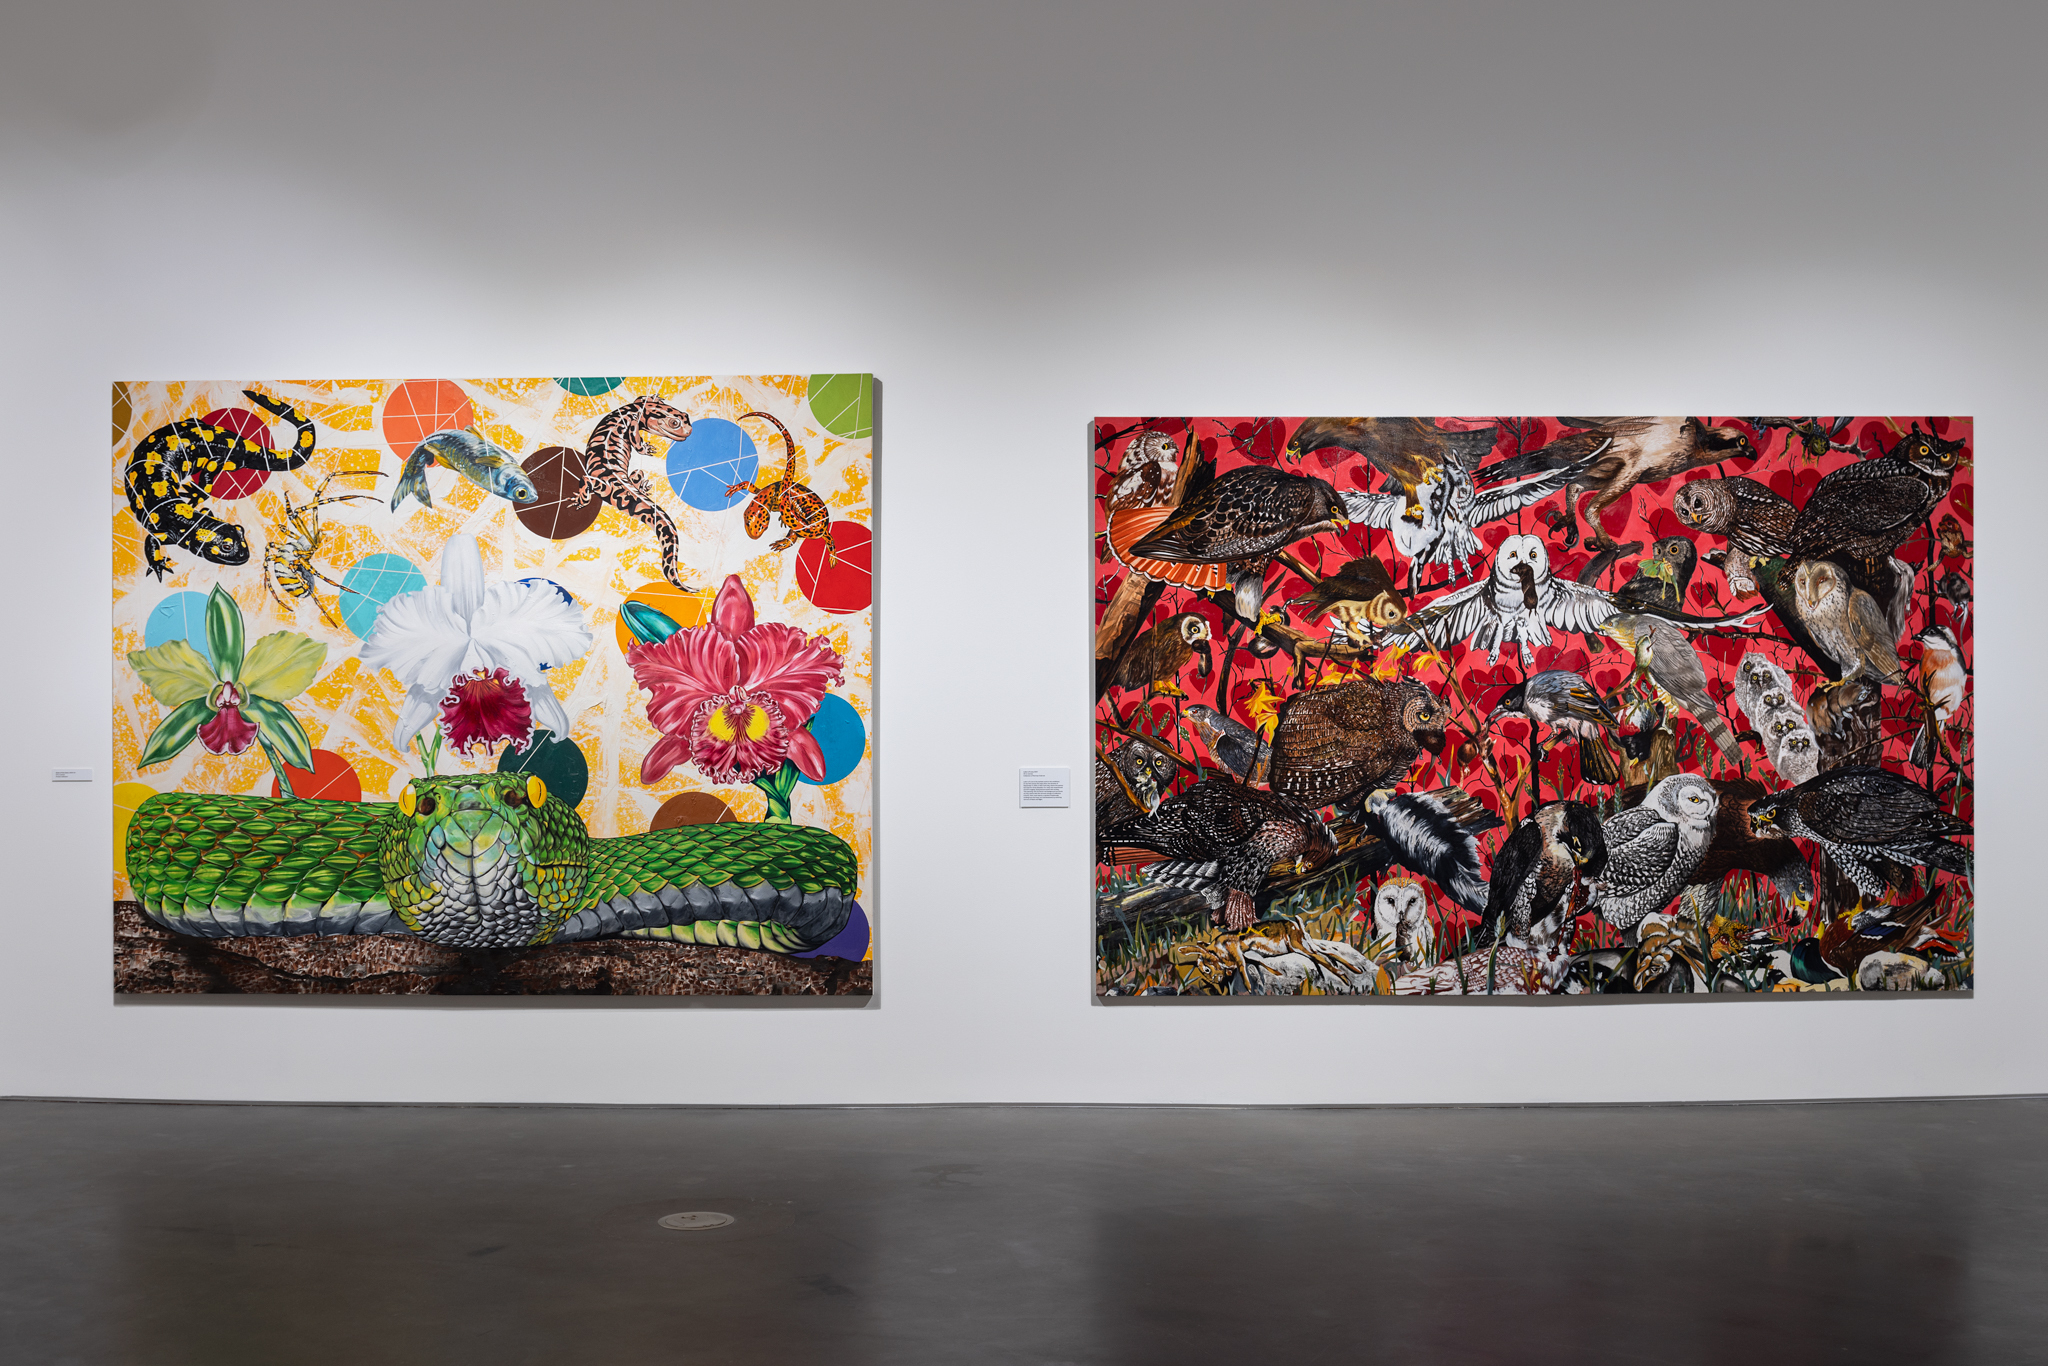 Two large murals hang on a white wall. Left: A green snake sits in the front, bright pink and white blooms and other colorful creatures float above. Right: A bright red background comprising of hearts sits behind a swarm of owls of colors and sizes.